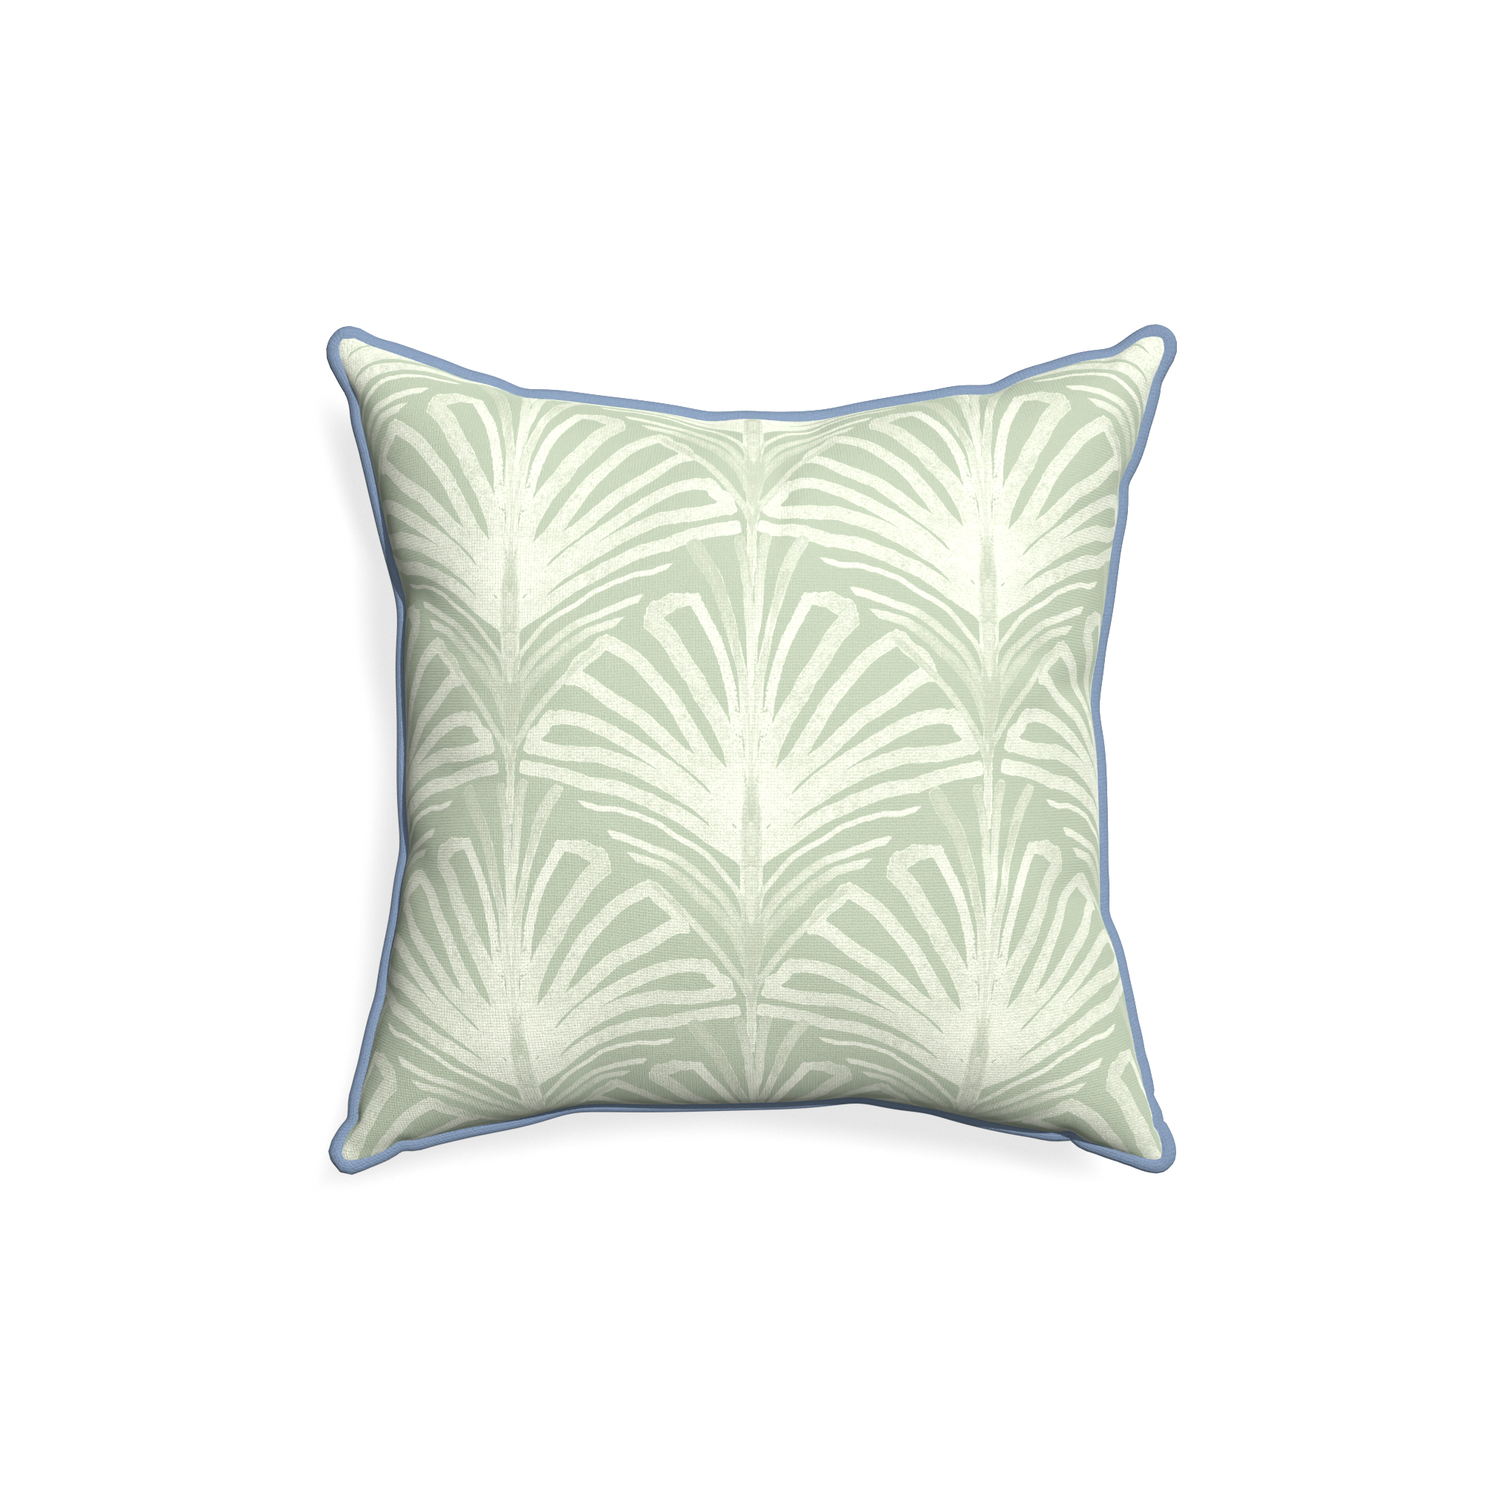 18-square suzy sage custom pillow with sky piping on white background